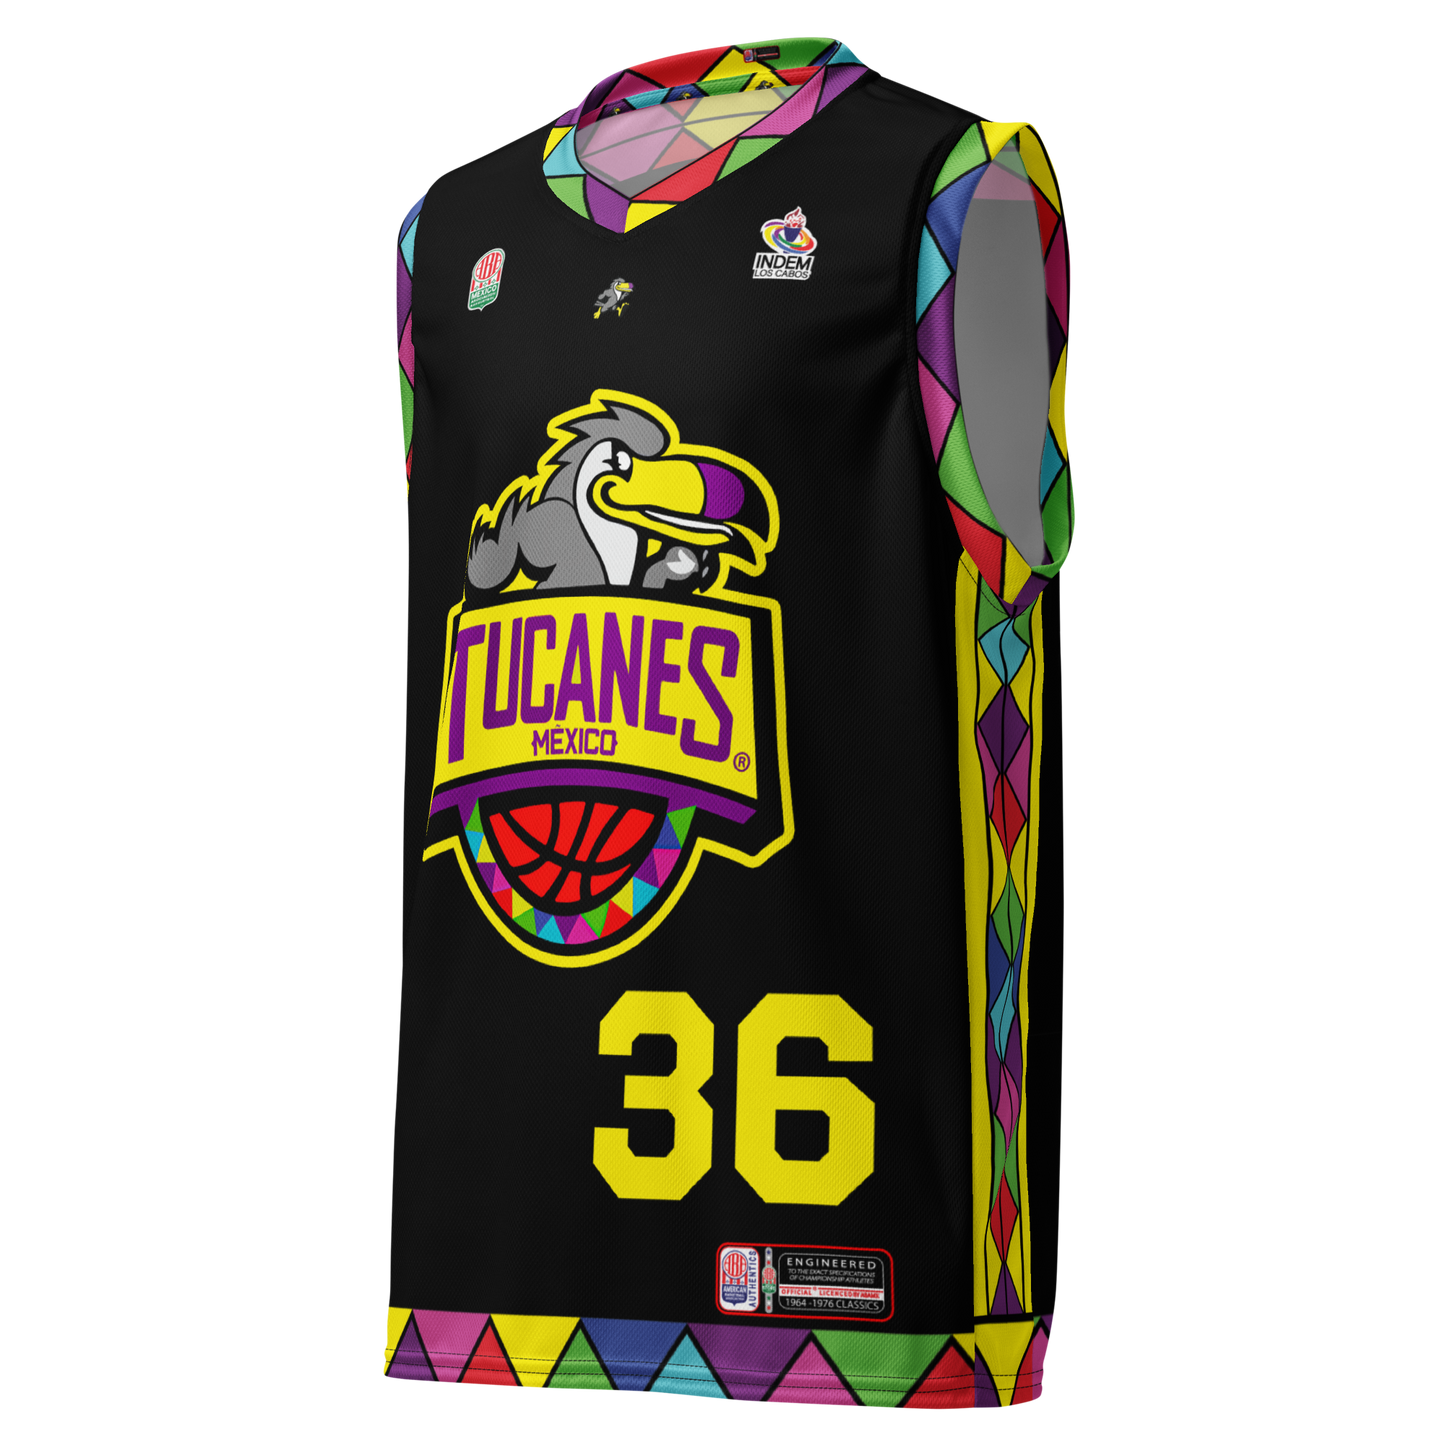 The Trevor Conner #36 Black Jersey Just Dropped at the ABAMX Store! 🏀🚀